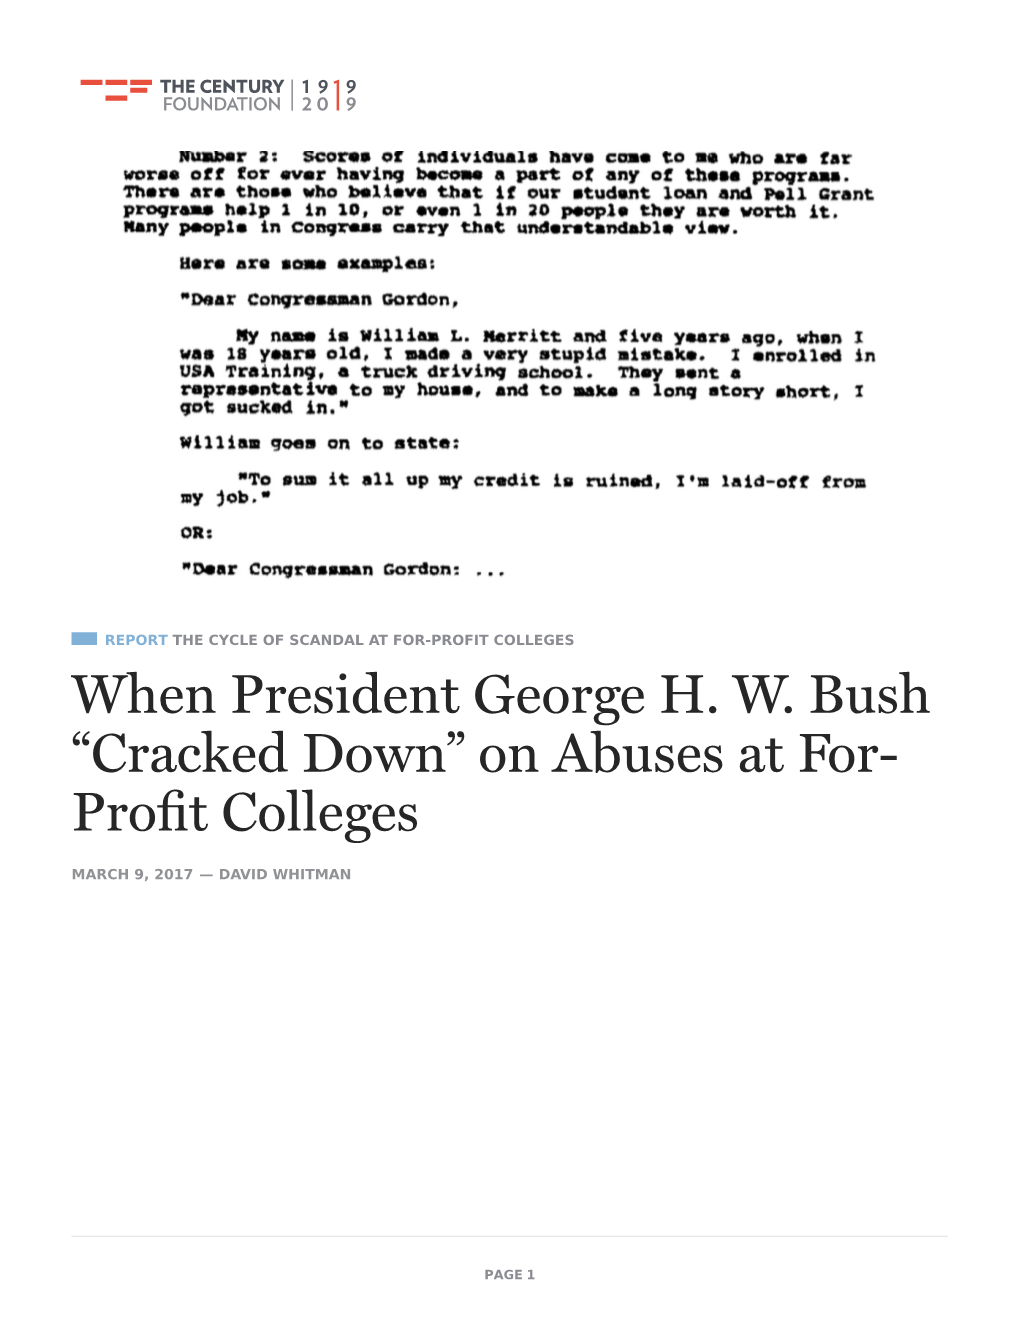 When President George H. W. Bush “Cracked Down” on Abuses at For- Proﬁt Colleges